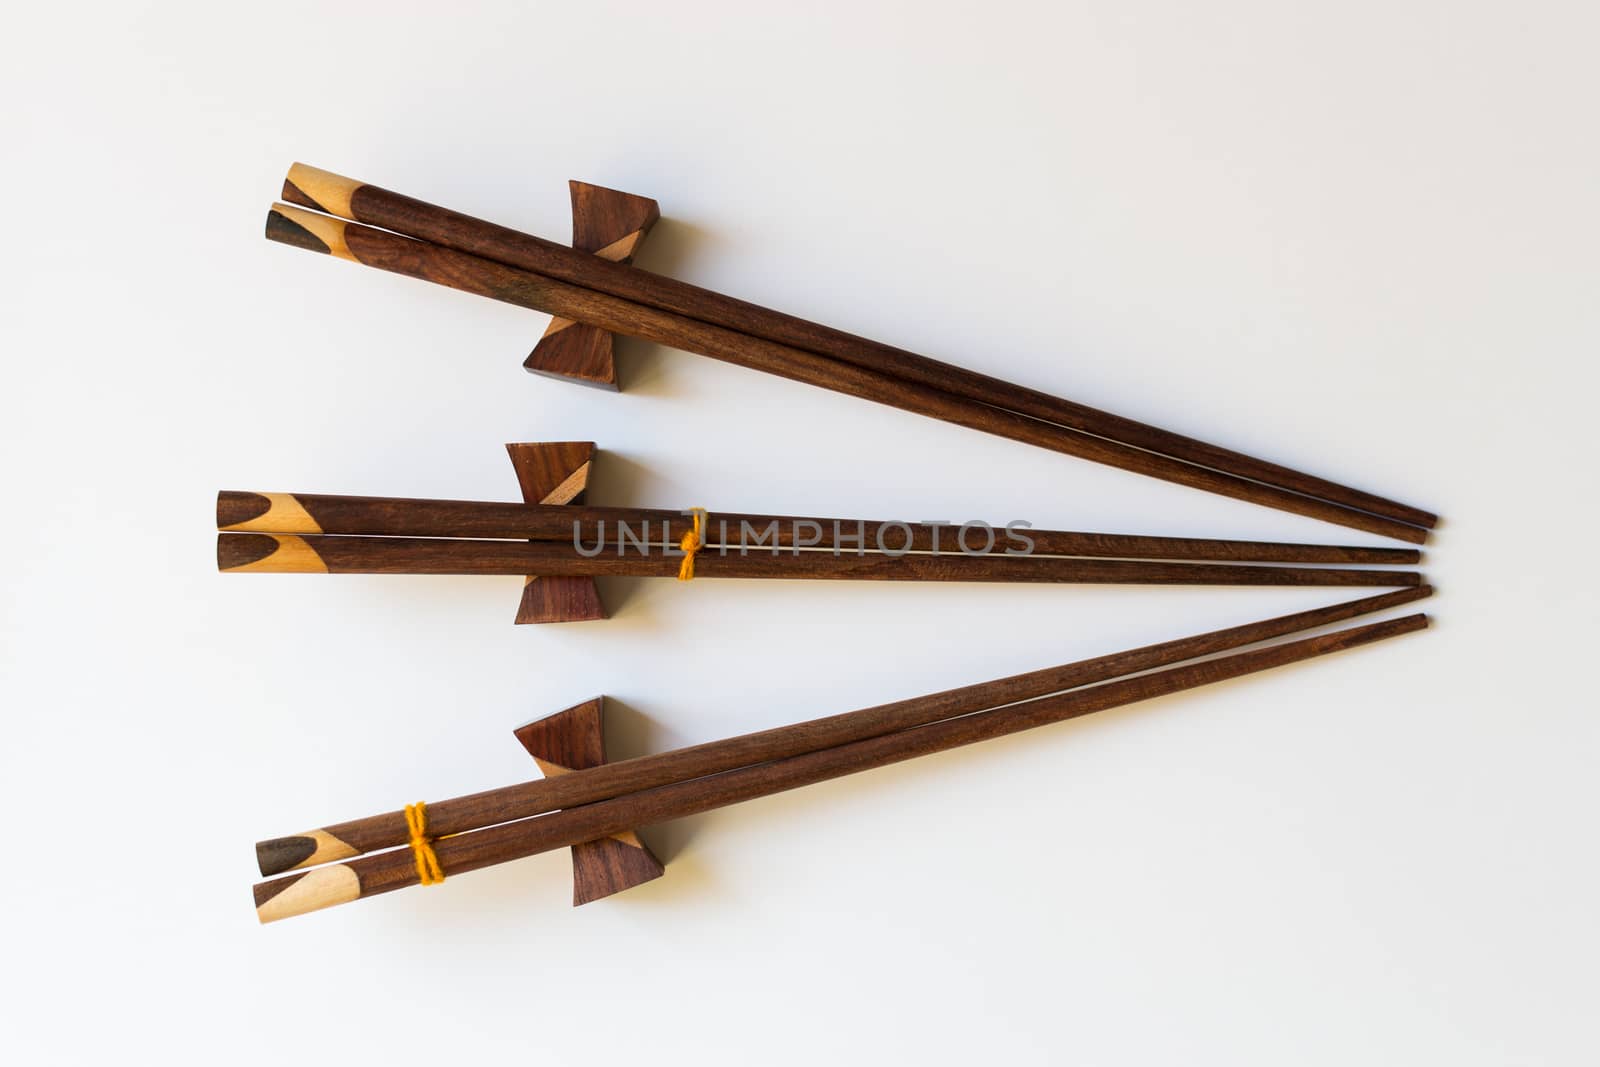 set of chinese chopsticks on a white background by enrico.lapponi